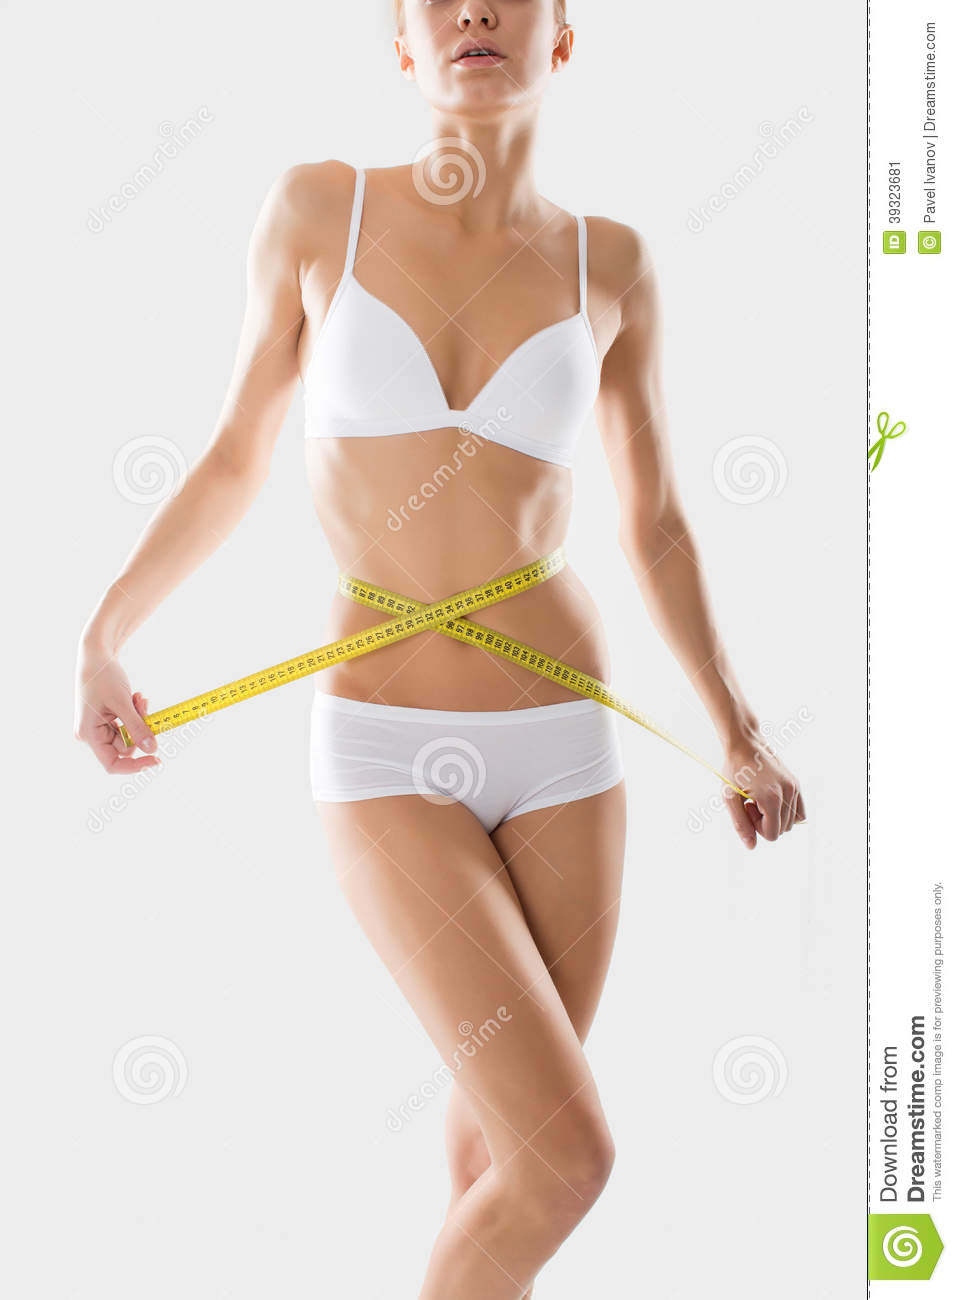 Girl Underwear Engaged In Measurement Figures Stock Photo   Image